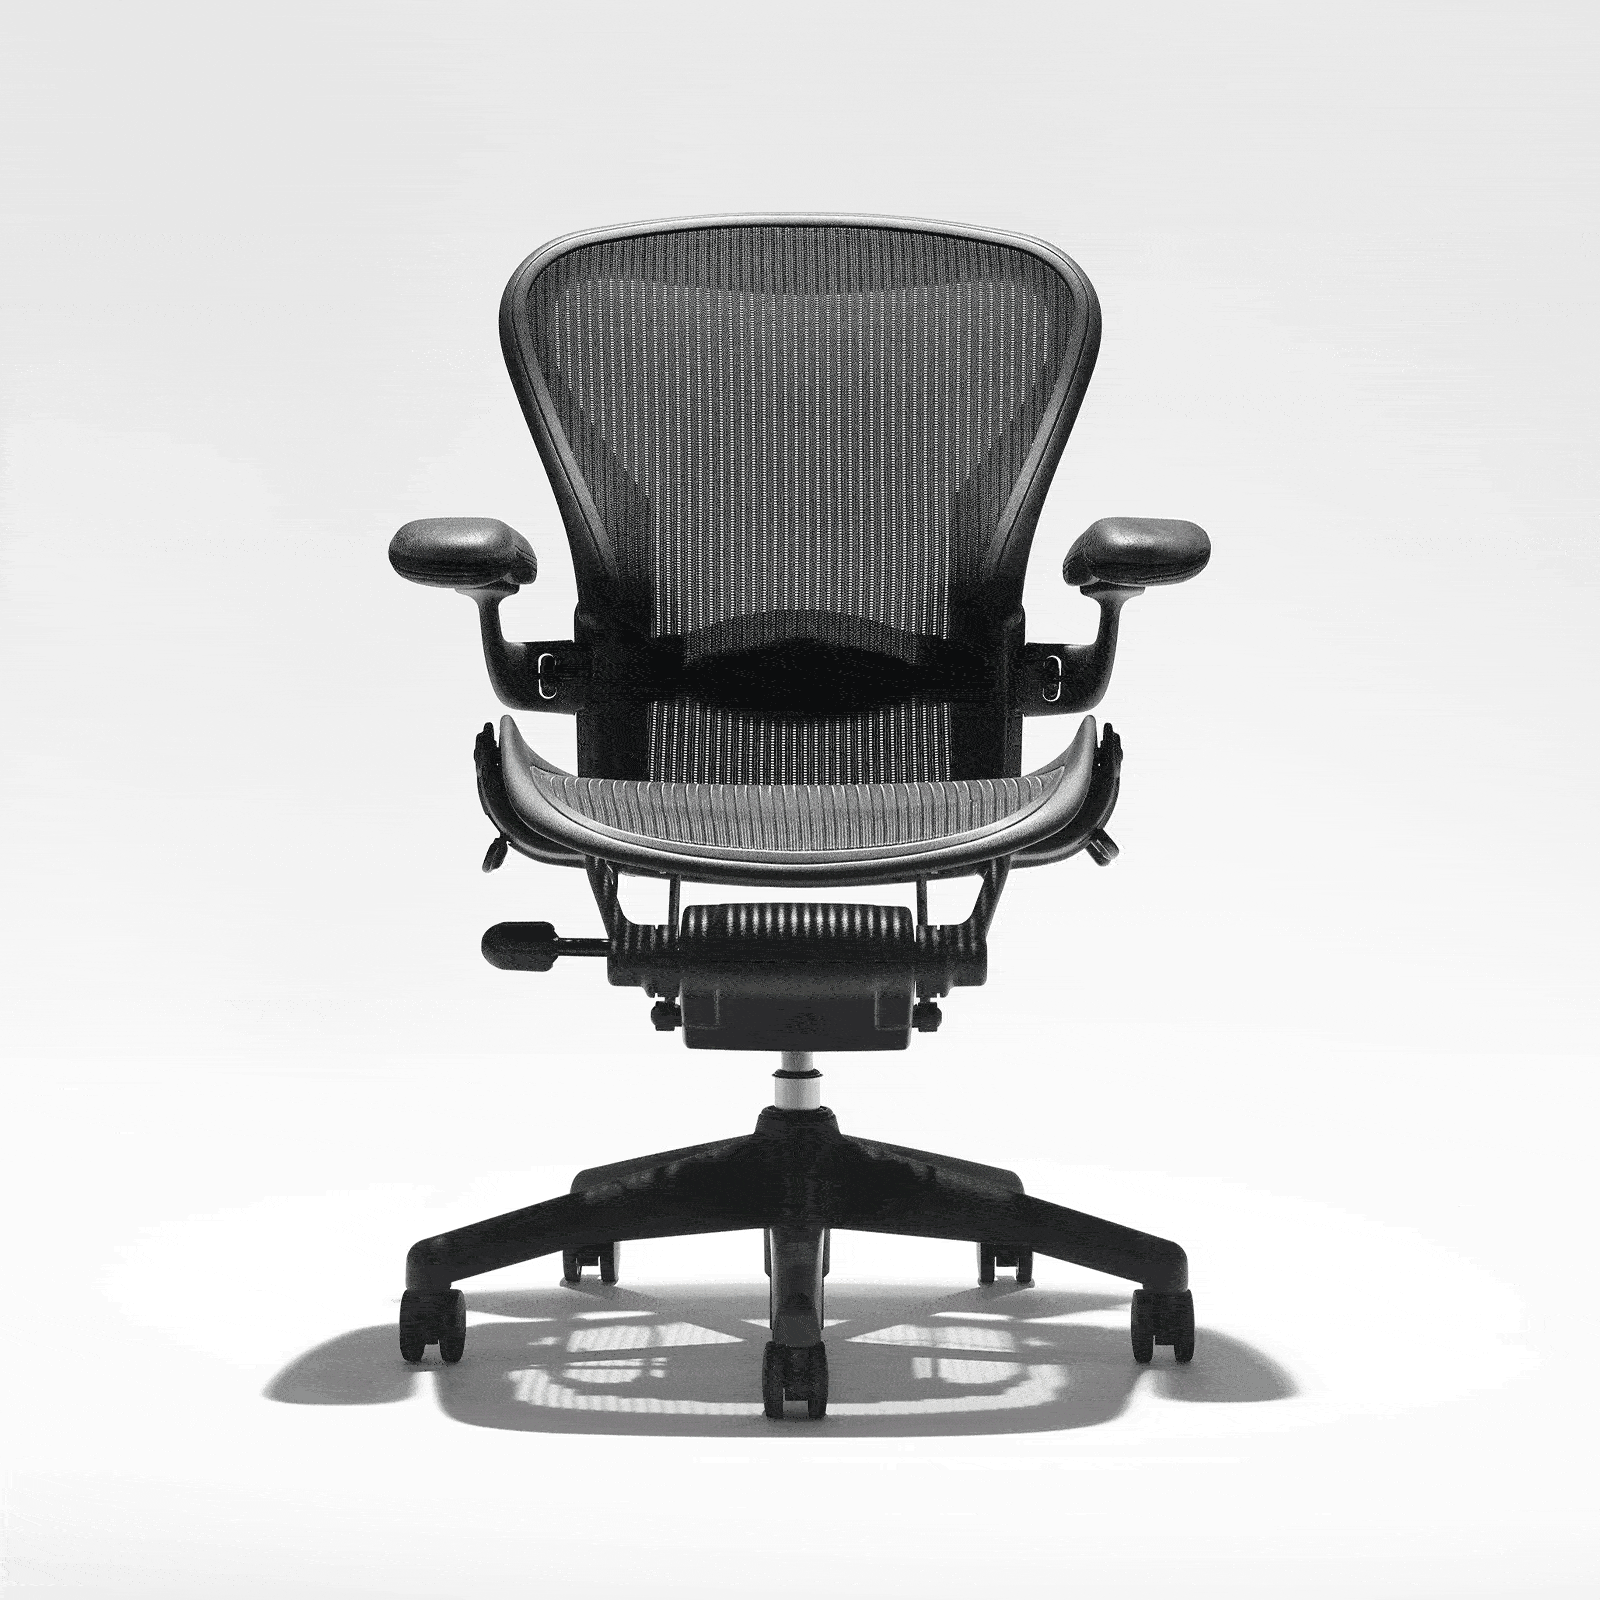 An animation showing different configuations of the Aeron Chair.